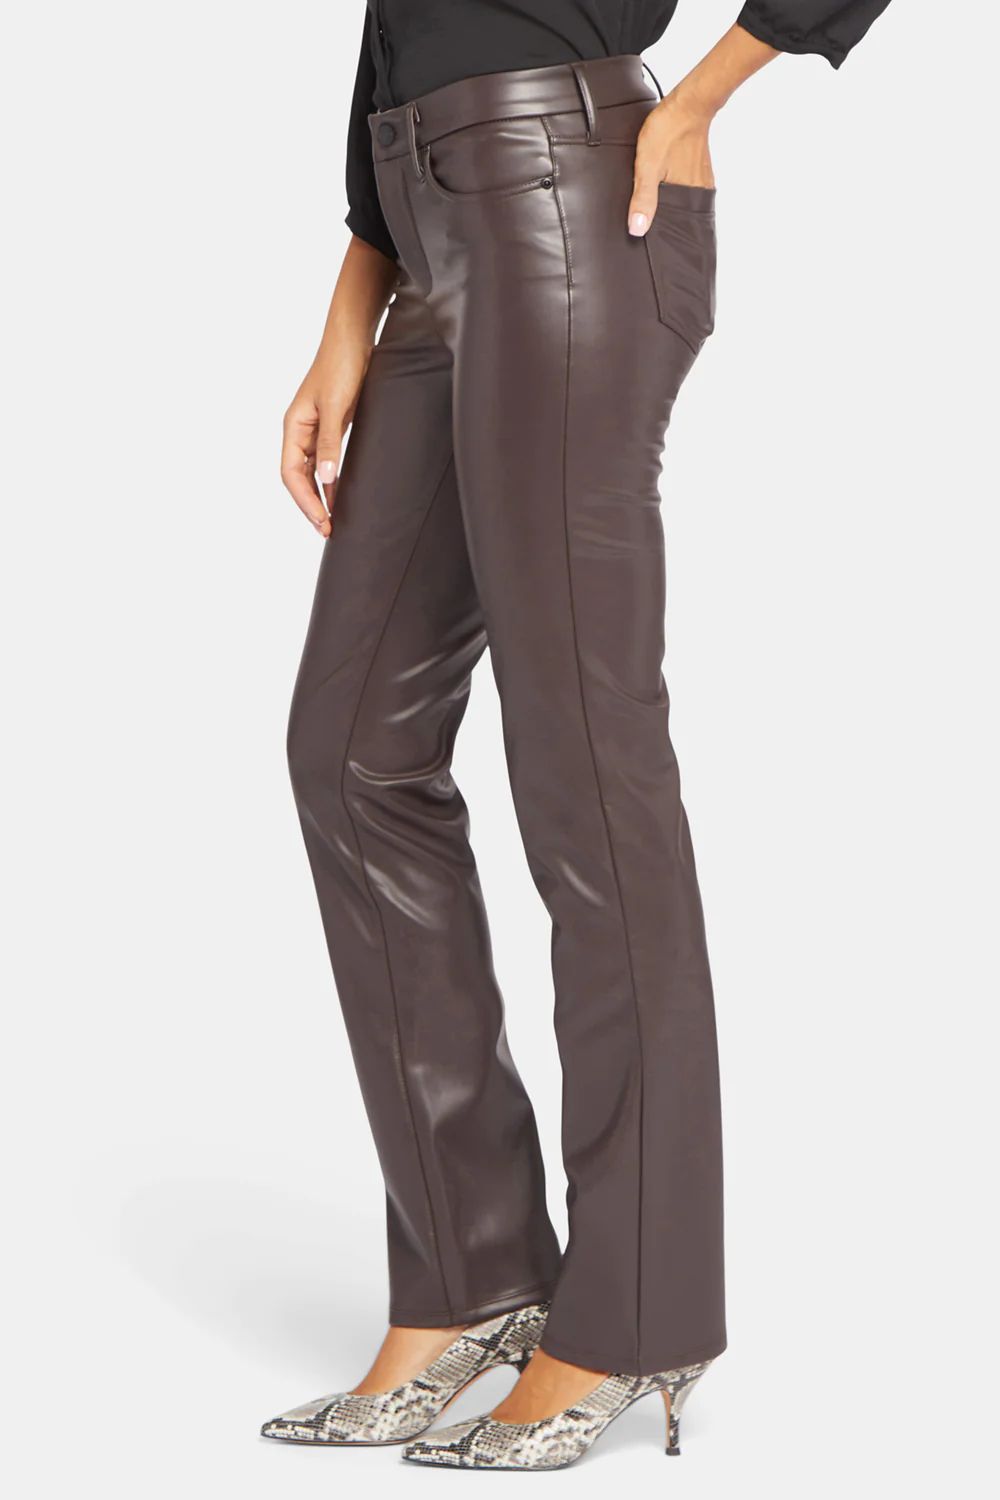 Faux Leather Marilyn Straight Pants - Cordovan | NYDJ